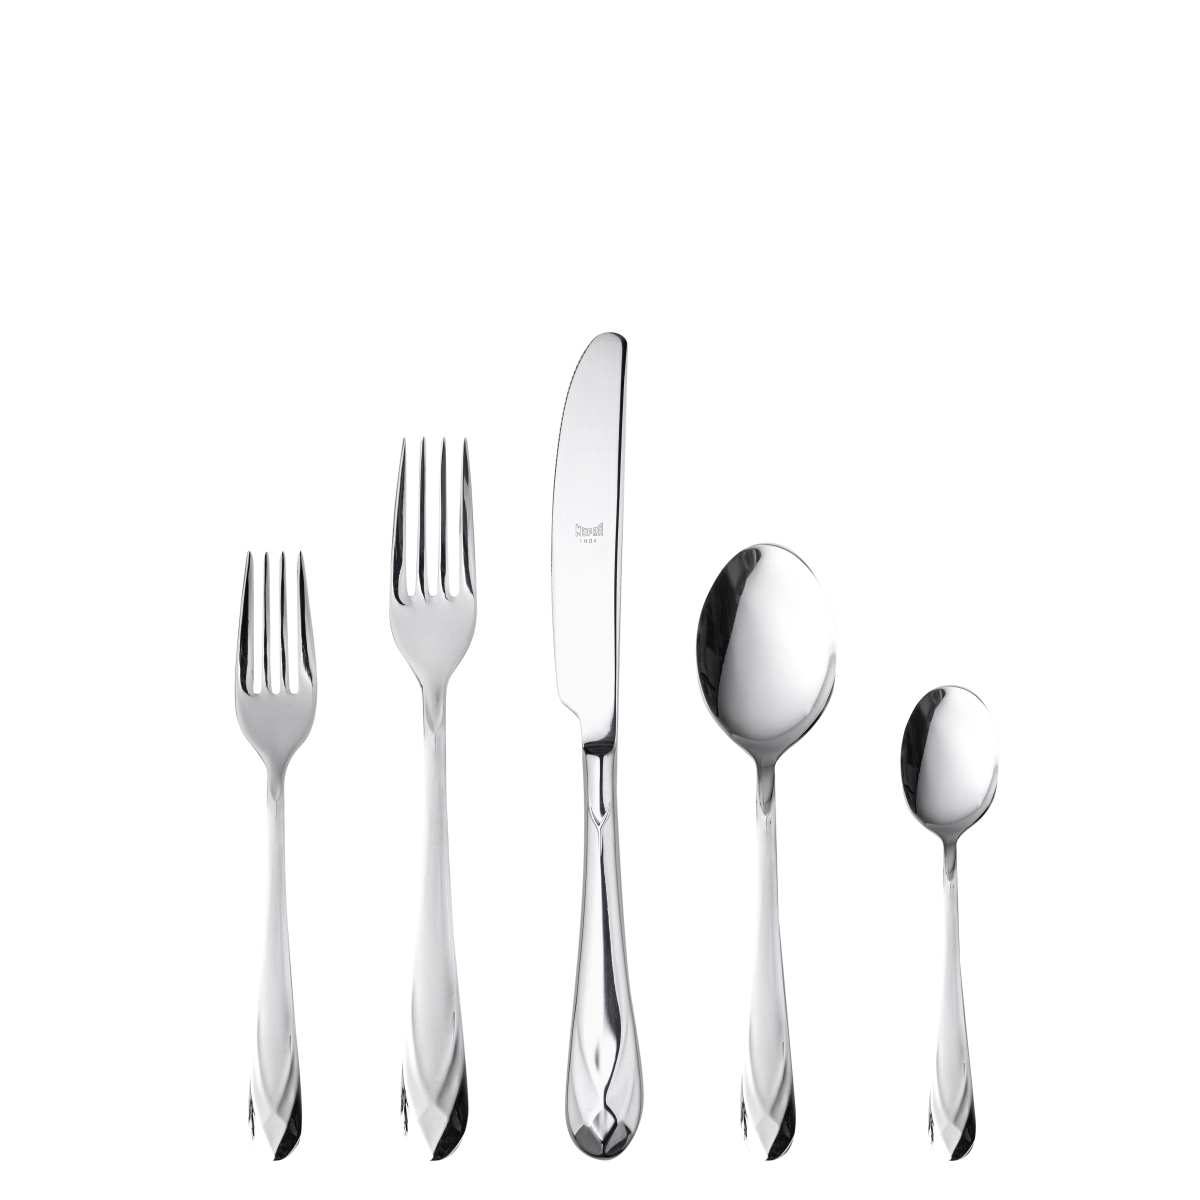 100922005 Stainless Steel Place Setting - Diamante - 5 Piece